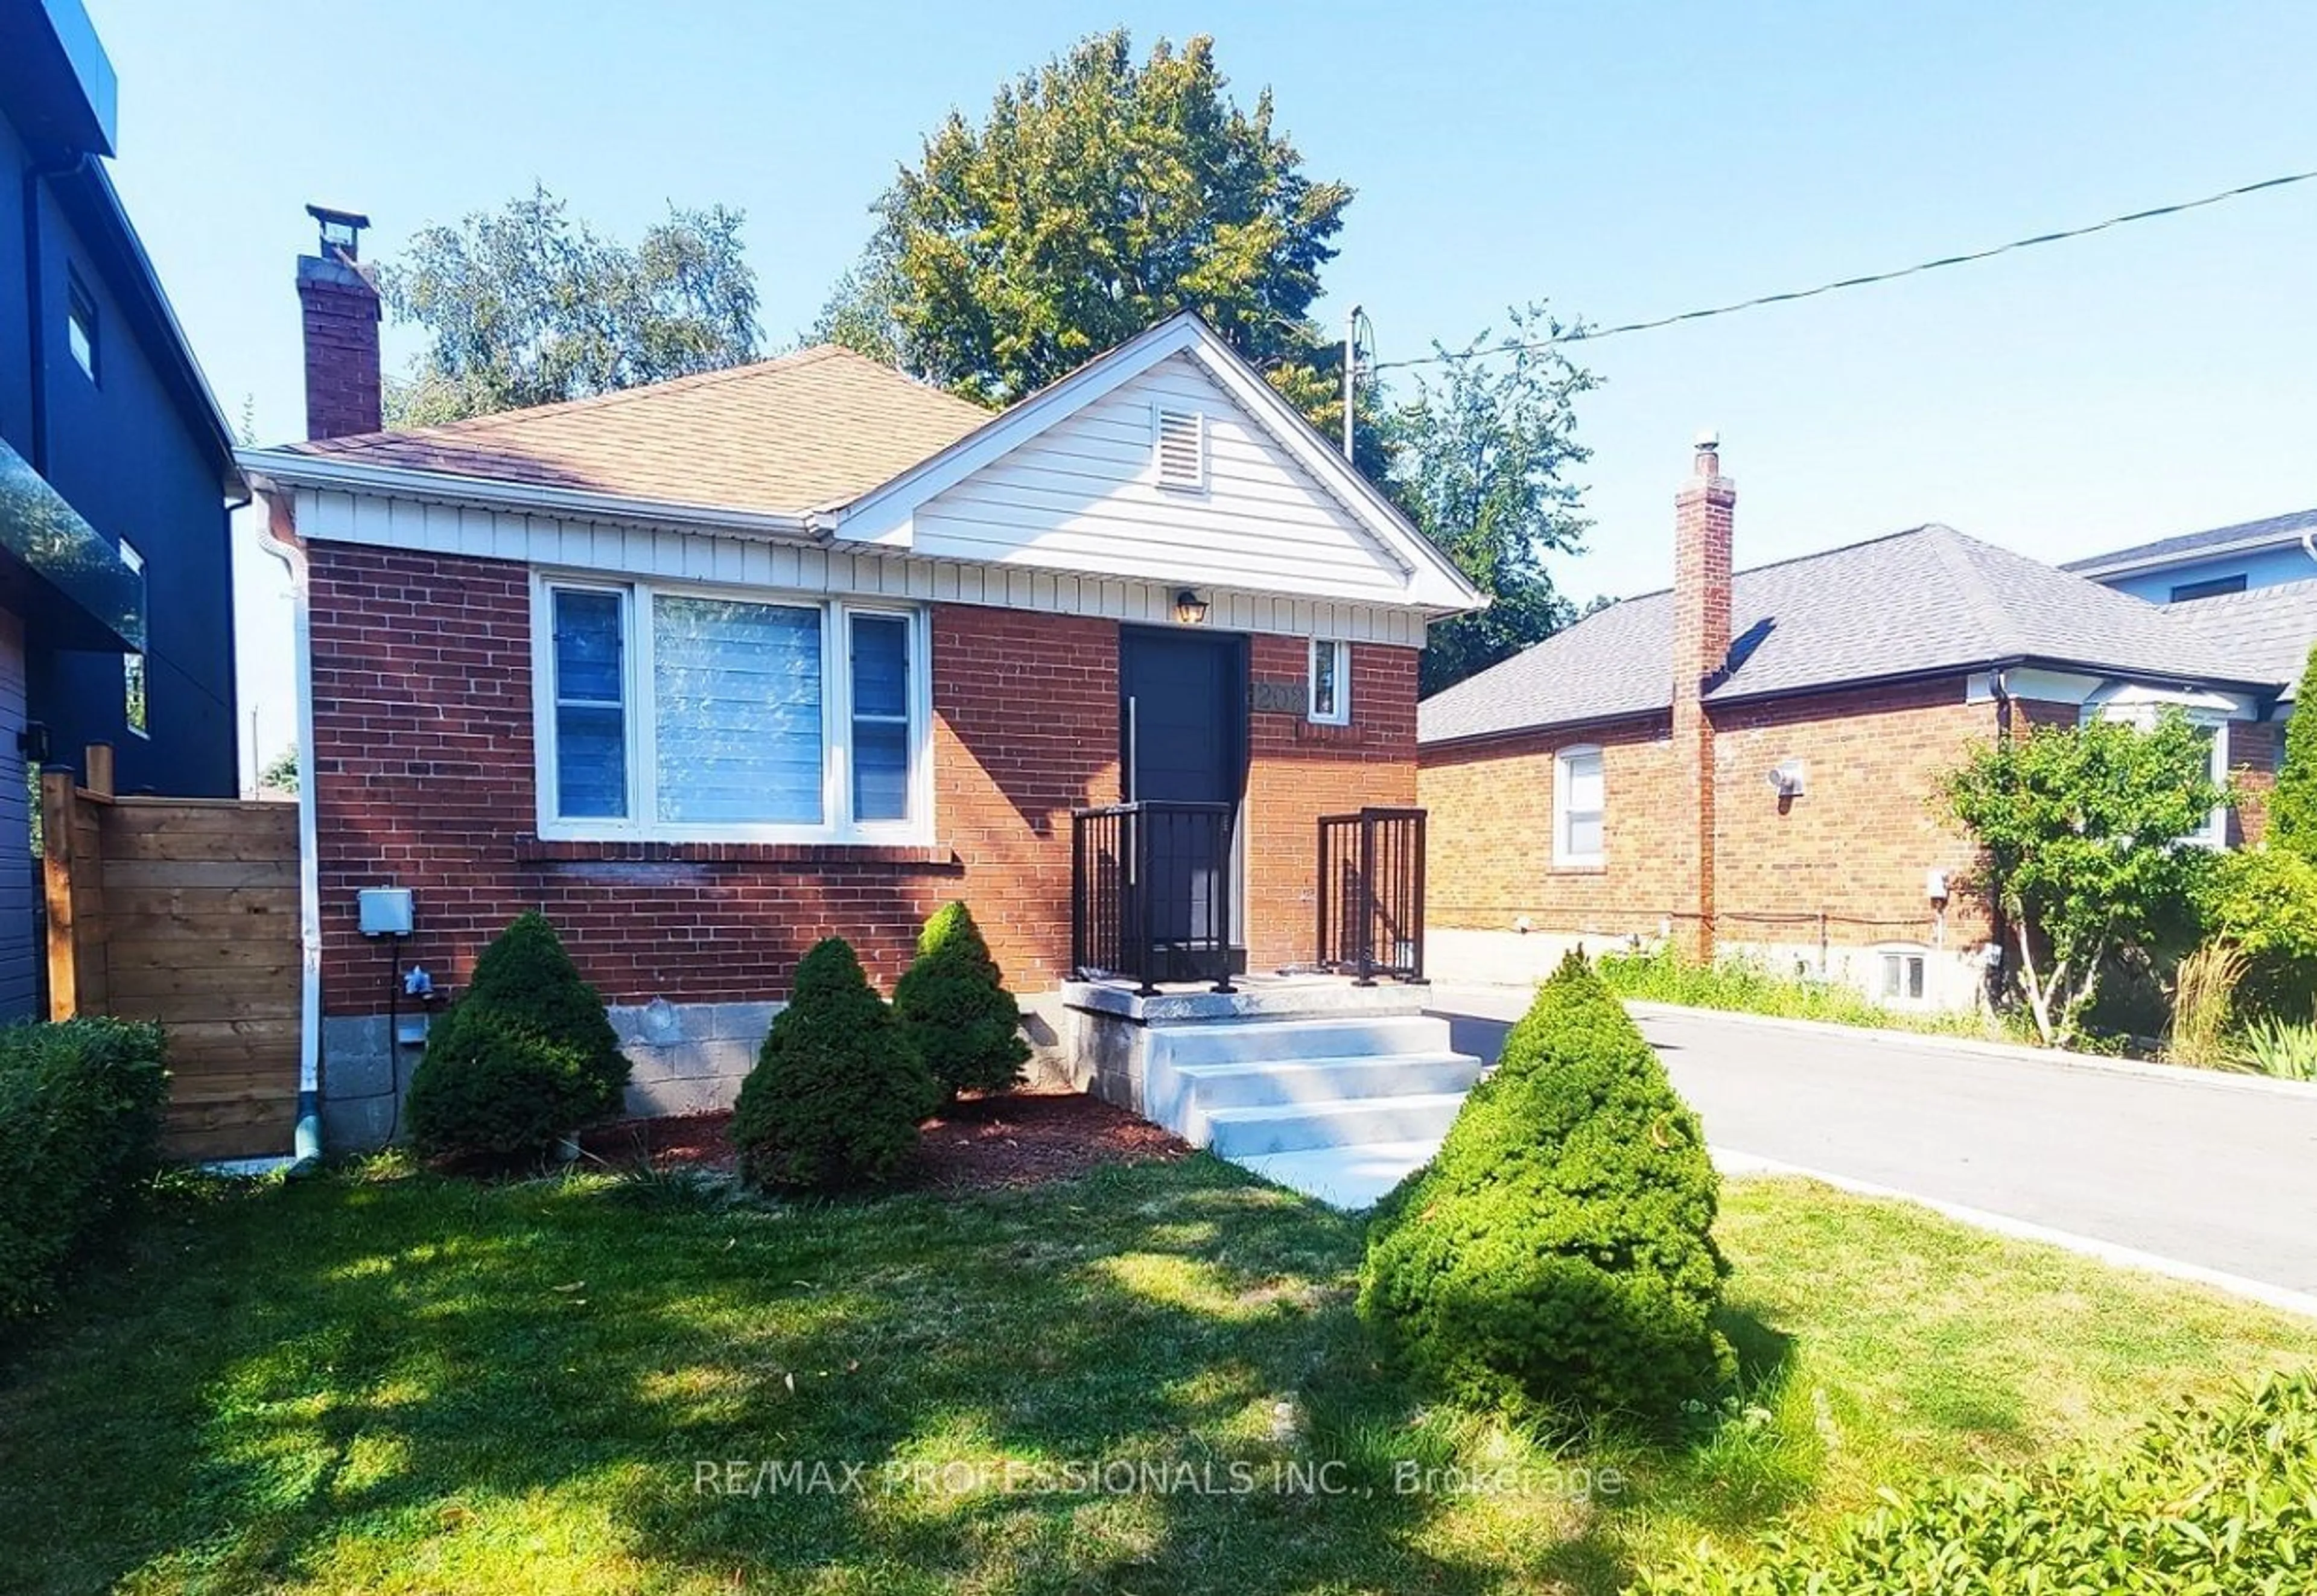 Home with brick exterior material for 202 Gamma St, Toronto Ontario M8W 4G5